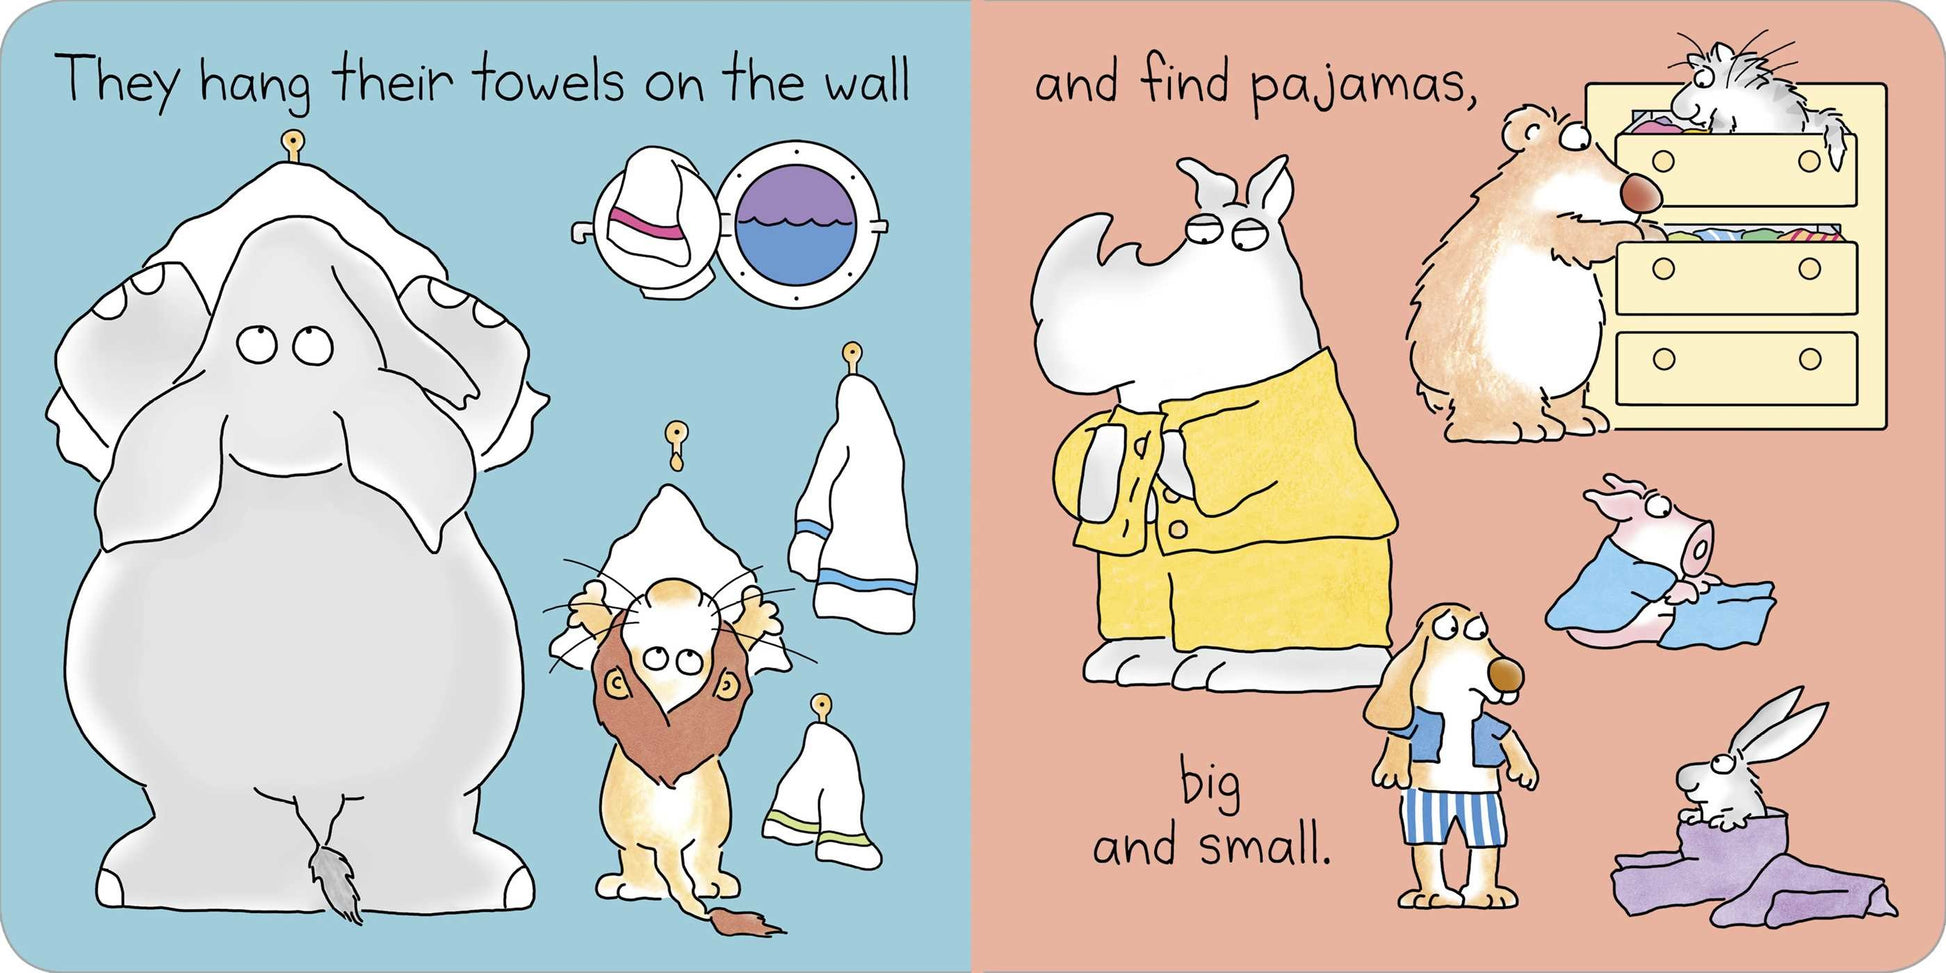 inside pages have illustrations of lots of animals getting ready for bed by hanging cloths, putting on pajamas, along with text